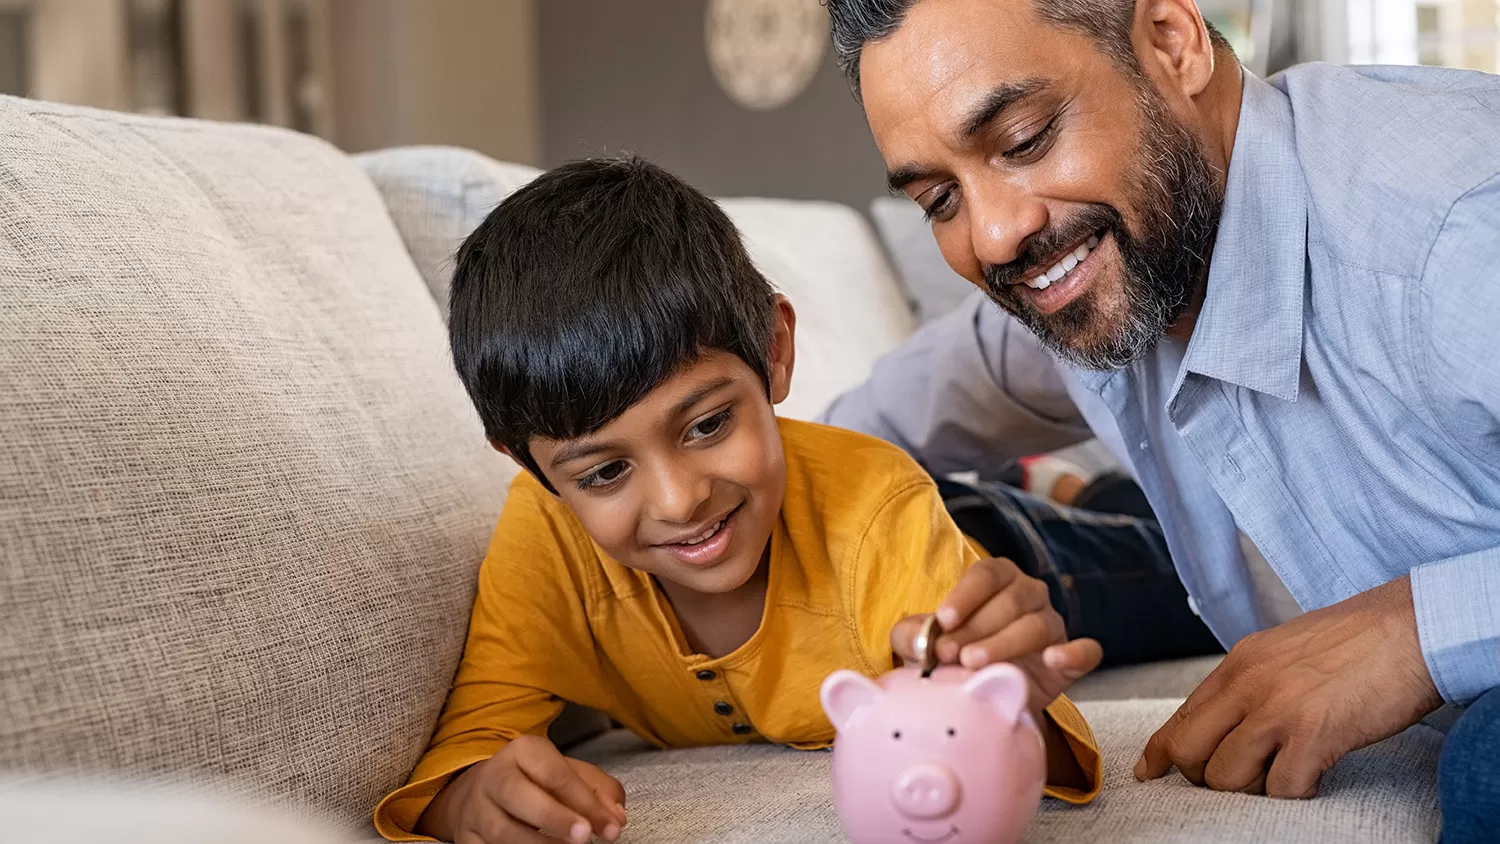 Son and father laying on a couch while son drops a coin in a piggy bank